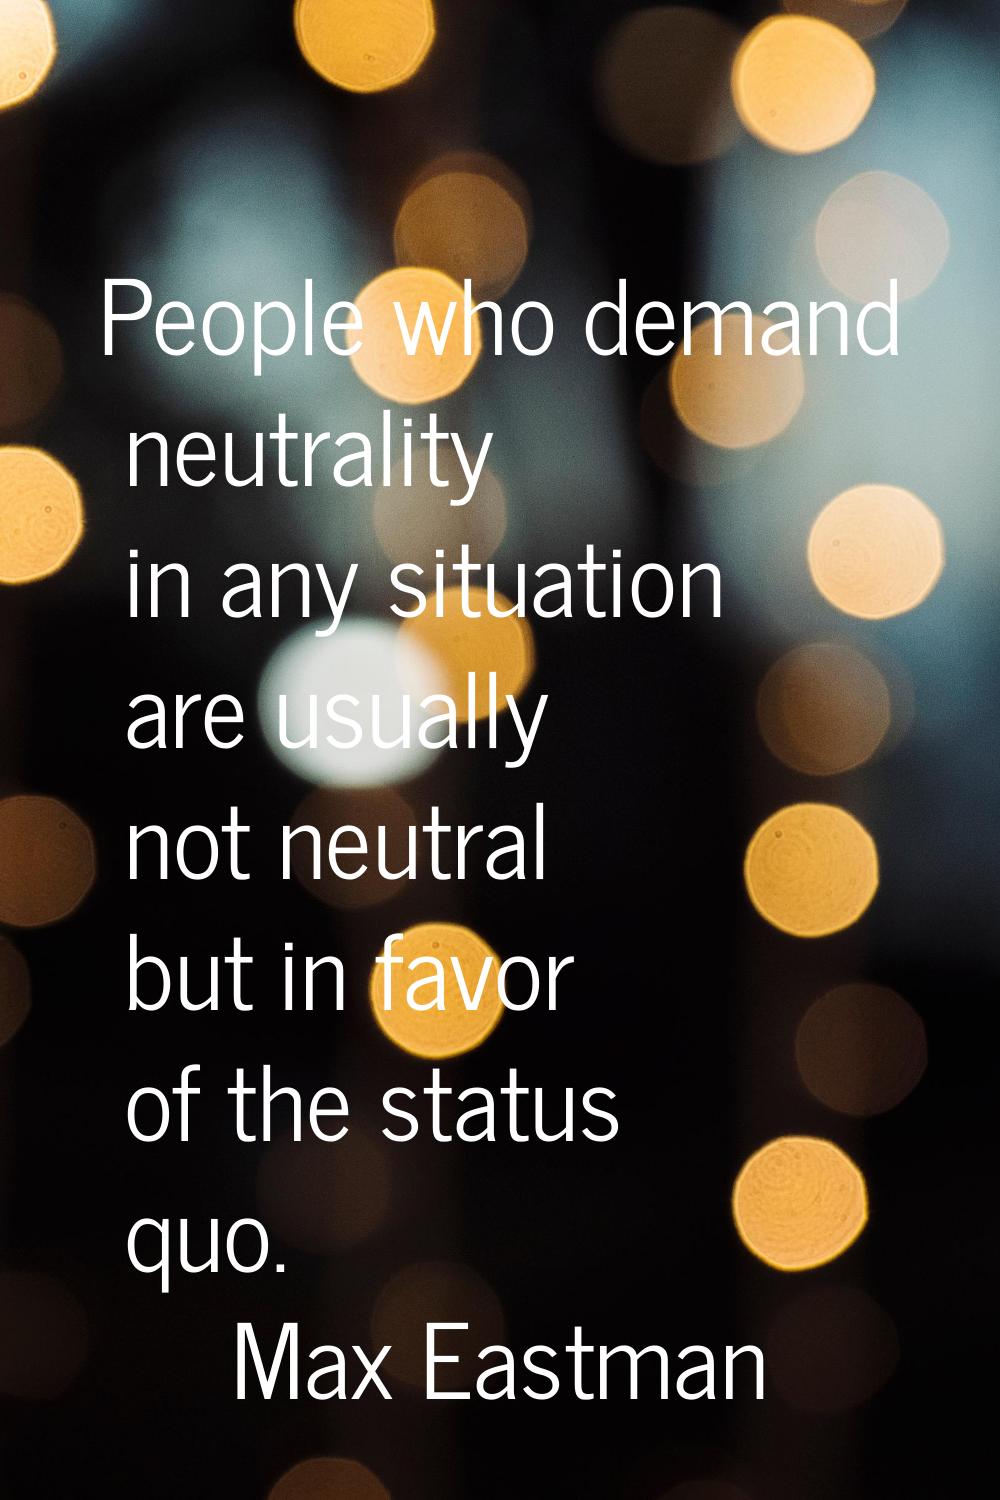 People who demand neutrality in any situation are usually not neutral but in favor of the status qu